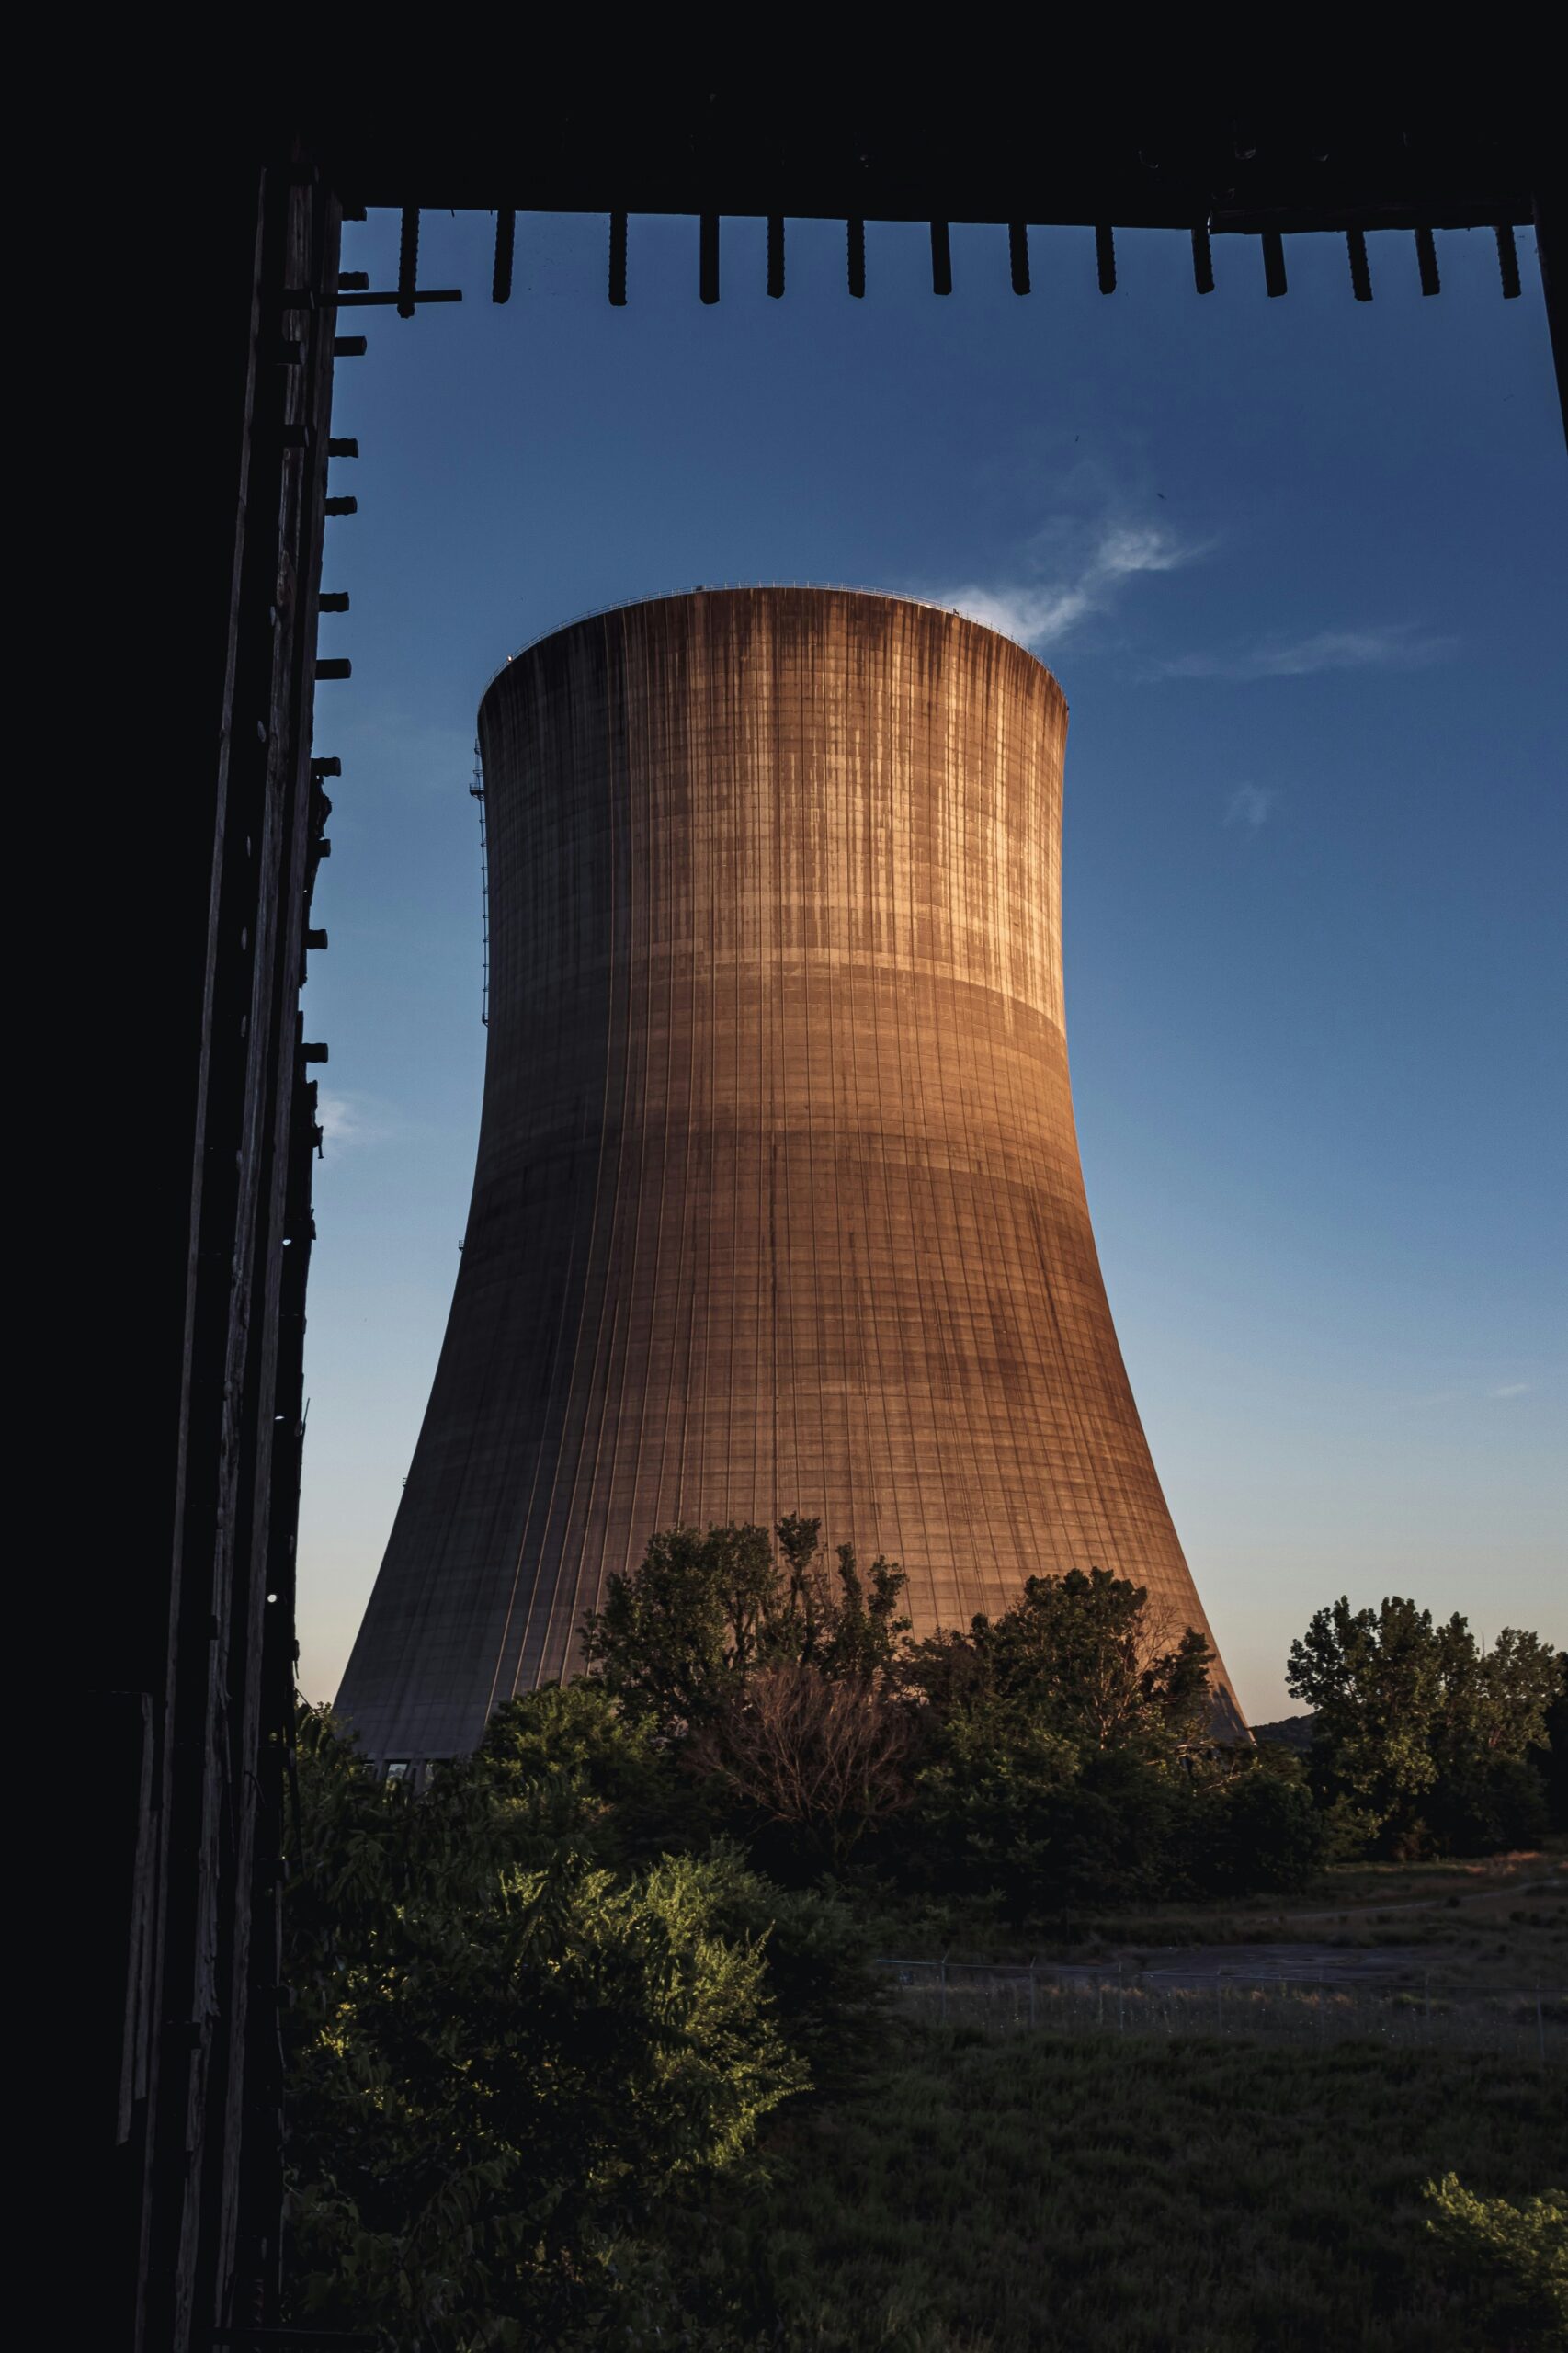 What Should I Do If There Is A Nuclear Accident?